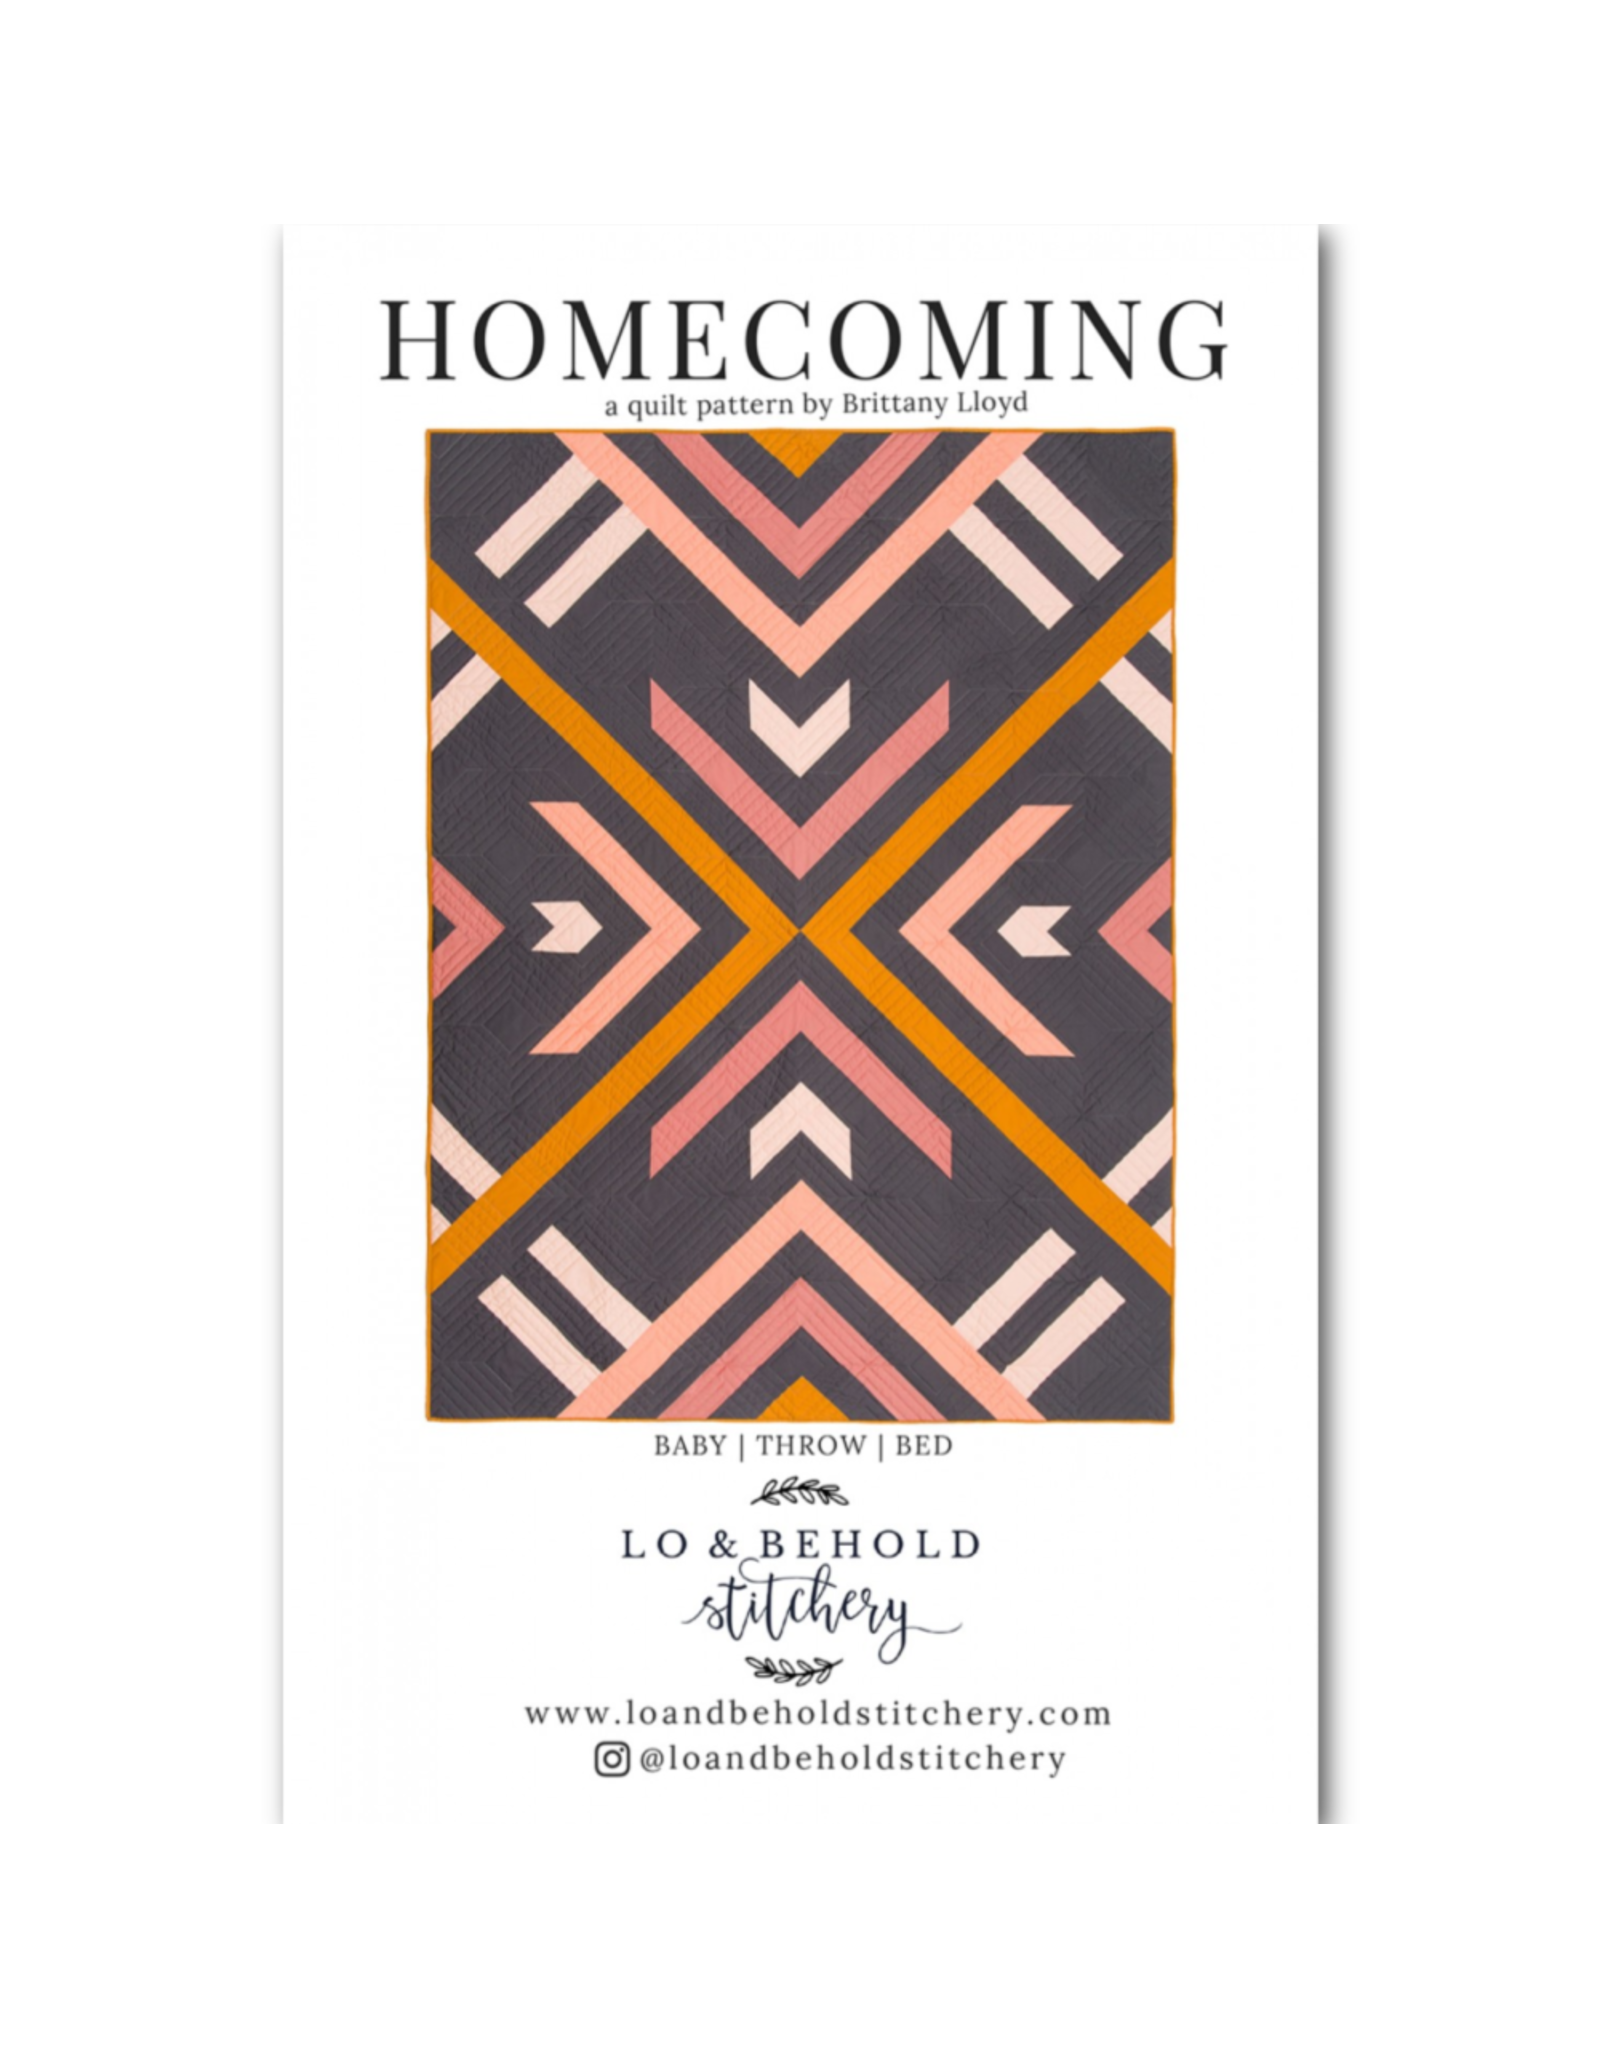 Lo & Behold Stitchery Homecoming Quilt Pattern